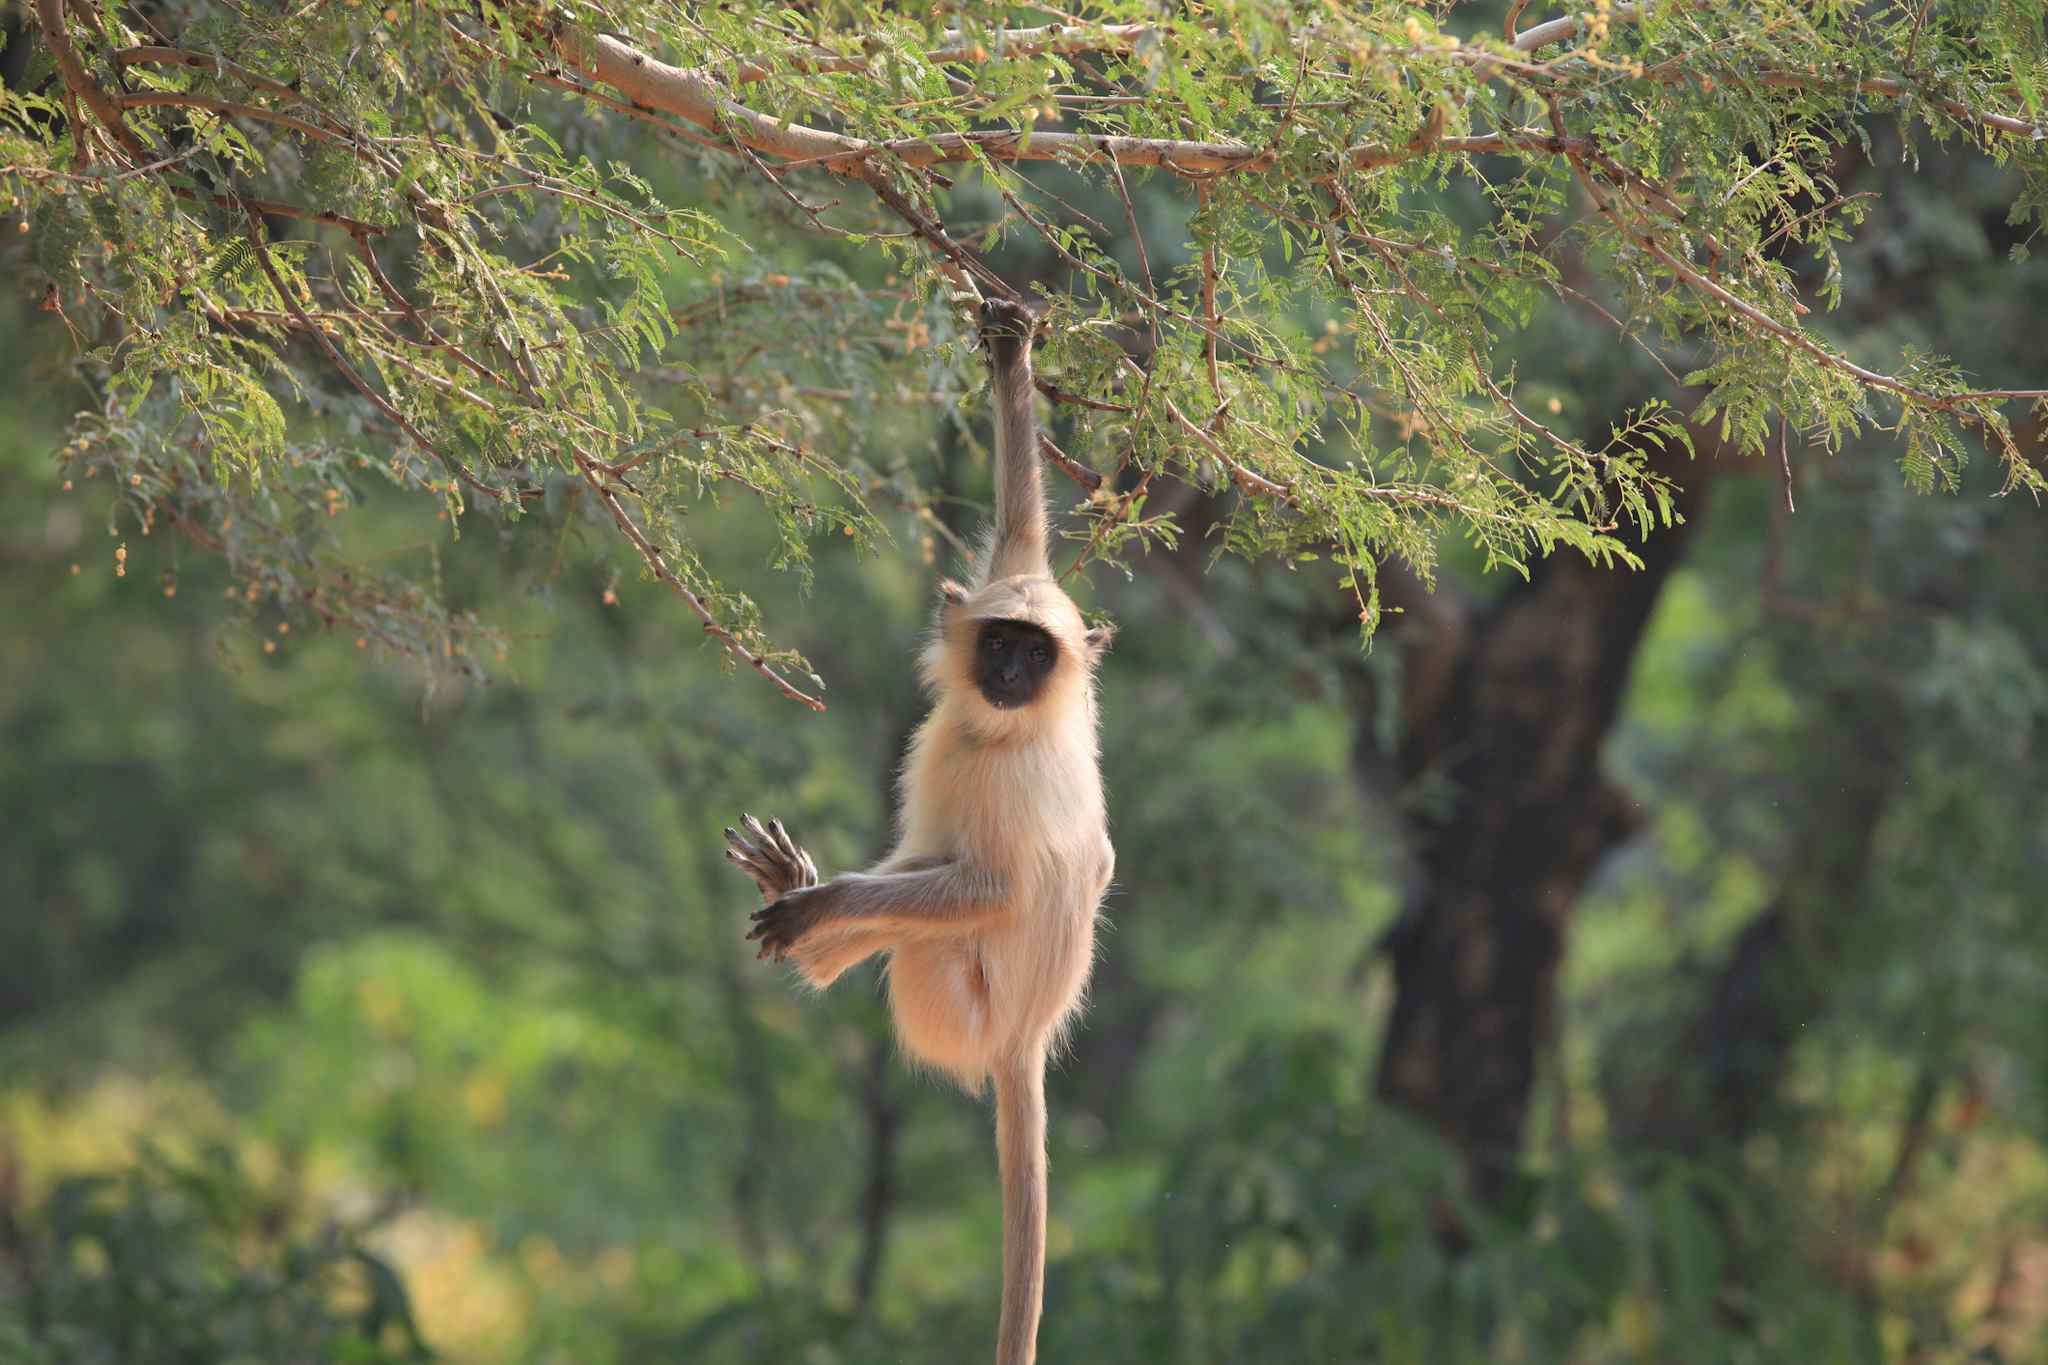 An image of a cute Langur Monkey hanging from one arm taken in India's famous Ranthambhore National Park. Photo: GettyImages-467448180

